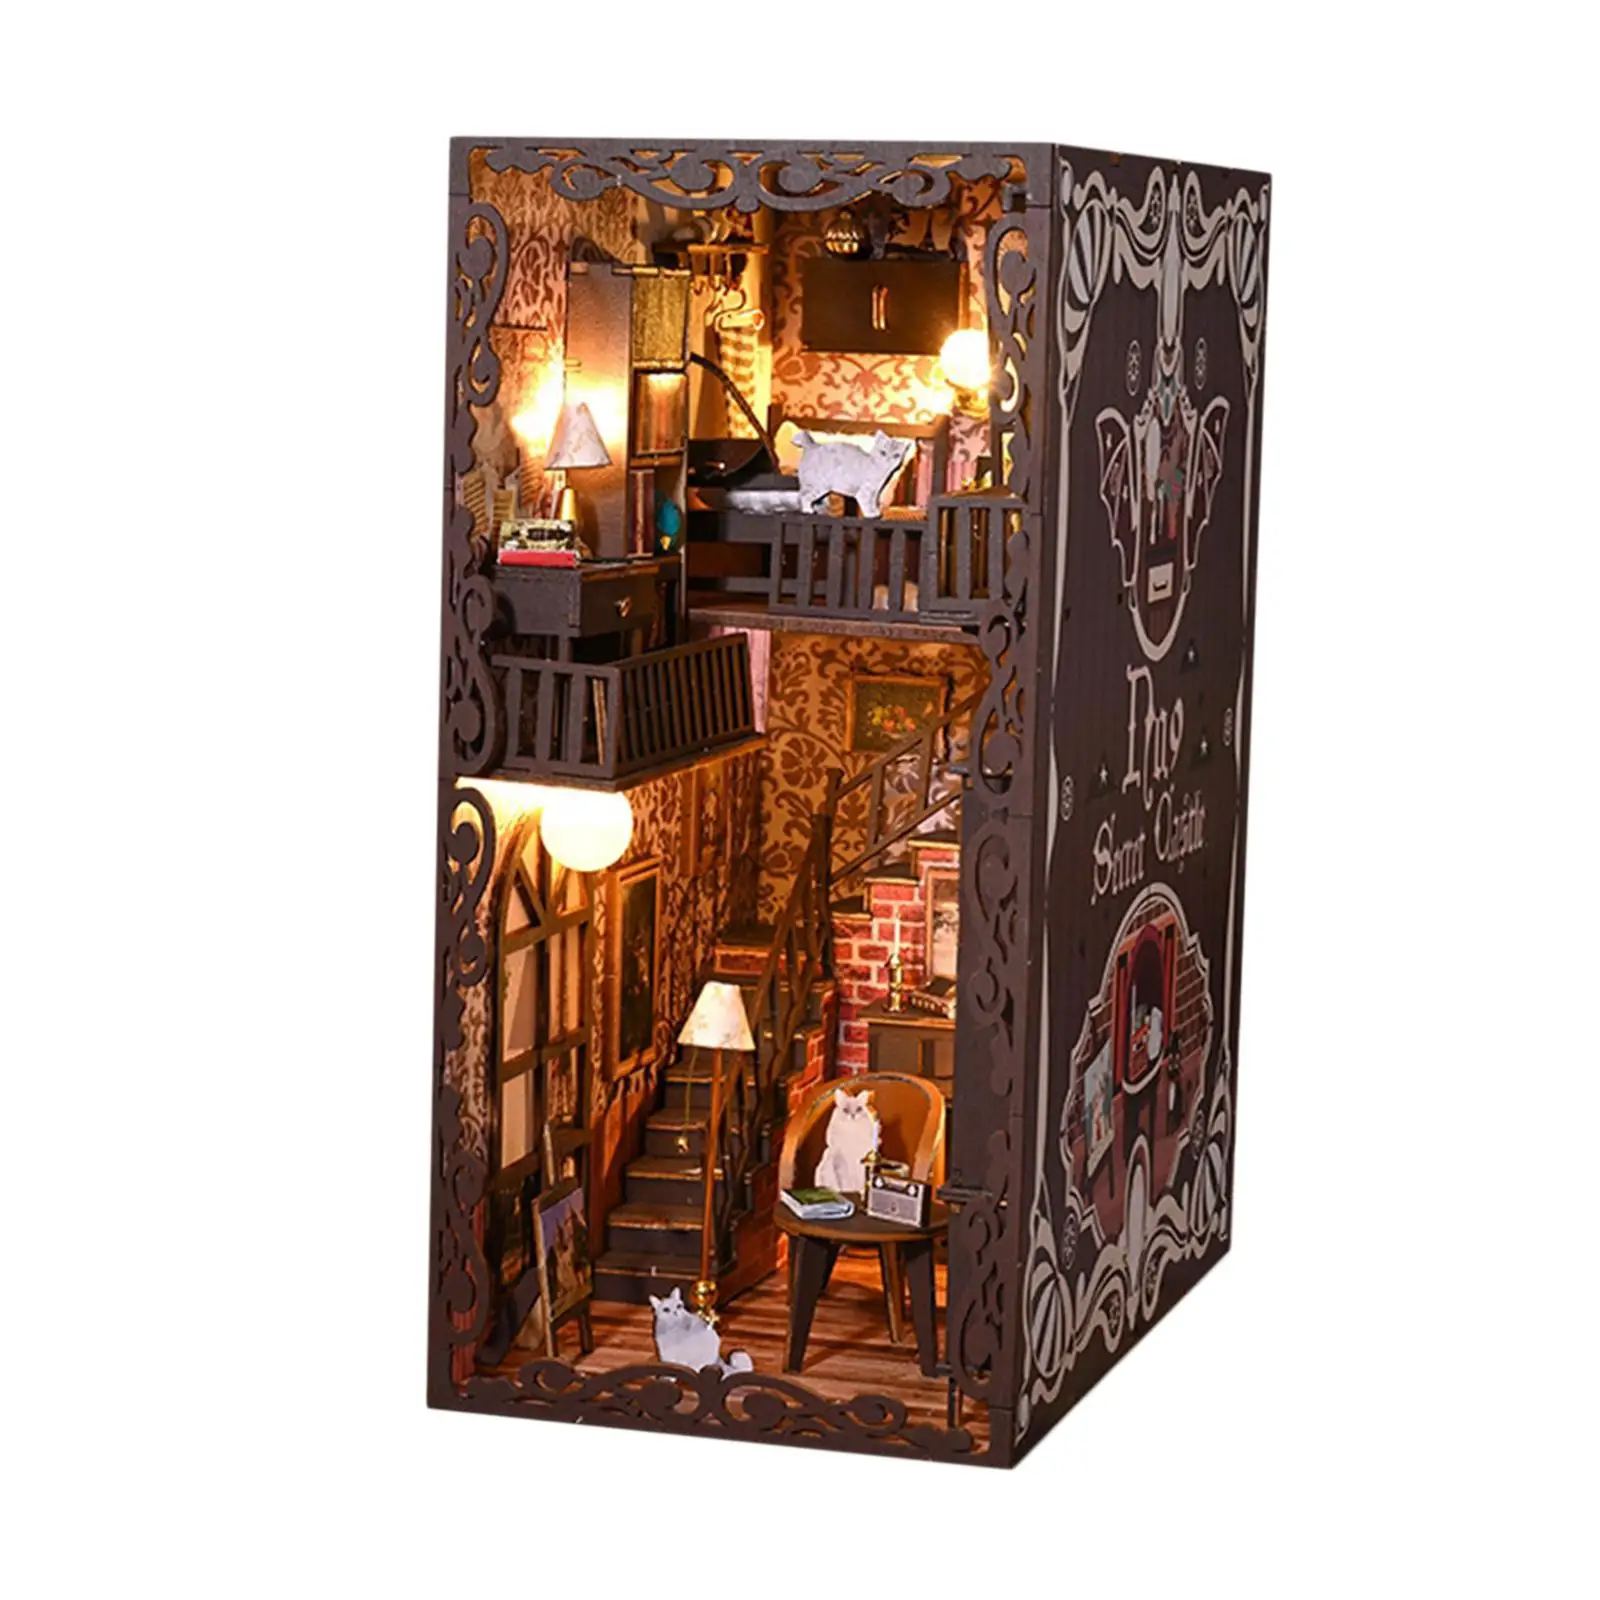 DIY Booknook Kits with LED Light Miniature House for Adults Children Teens